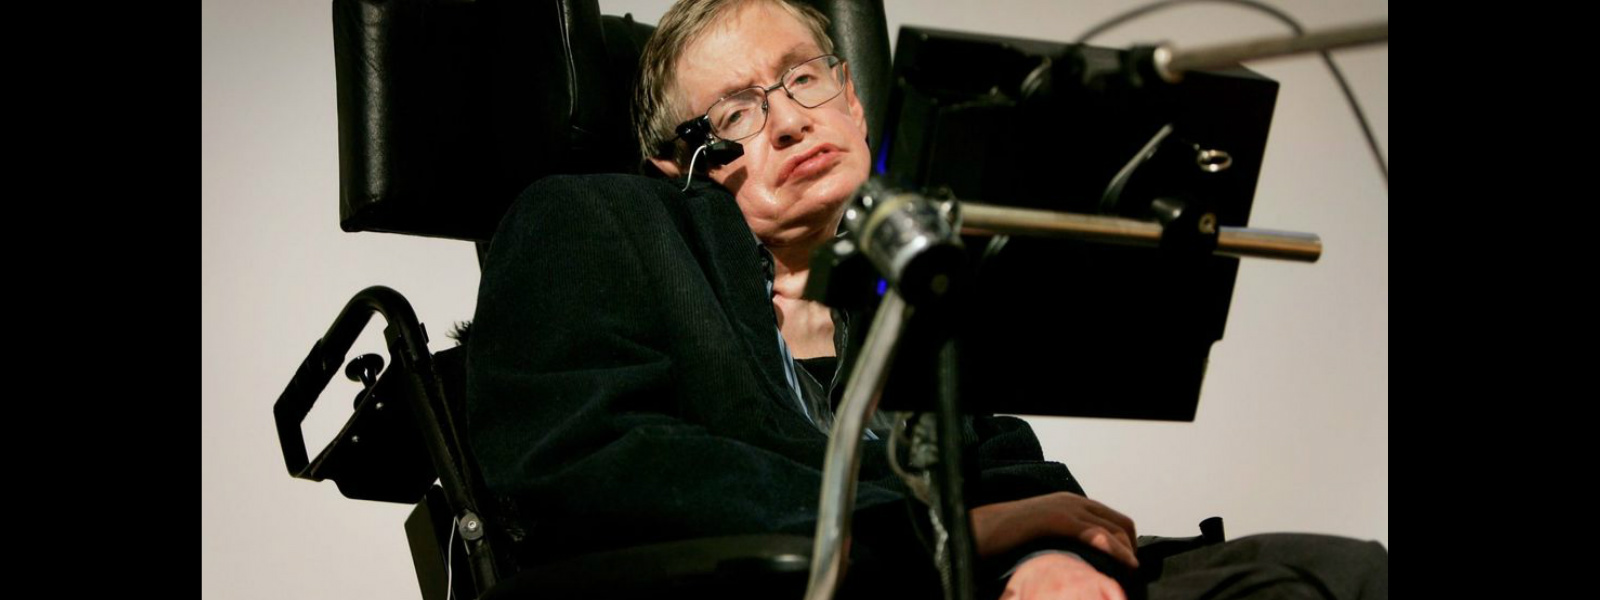 Prof Stephen Hawking's funeral to take place today